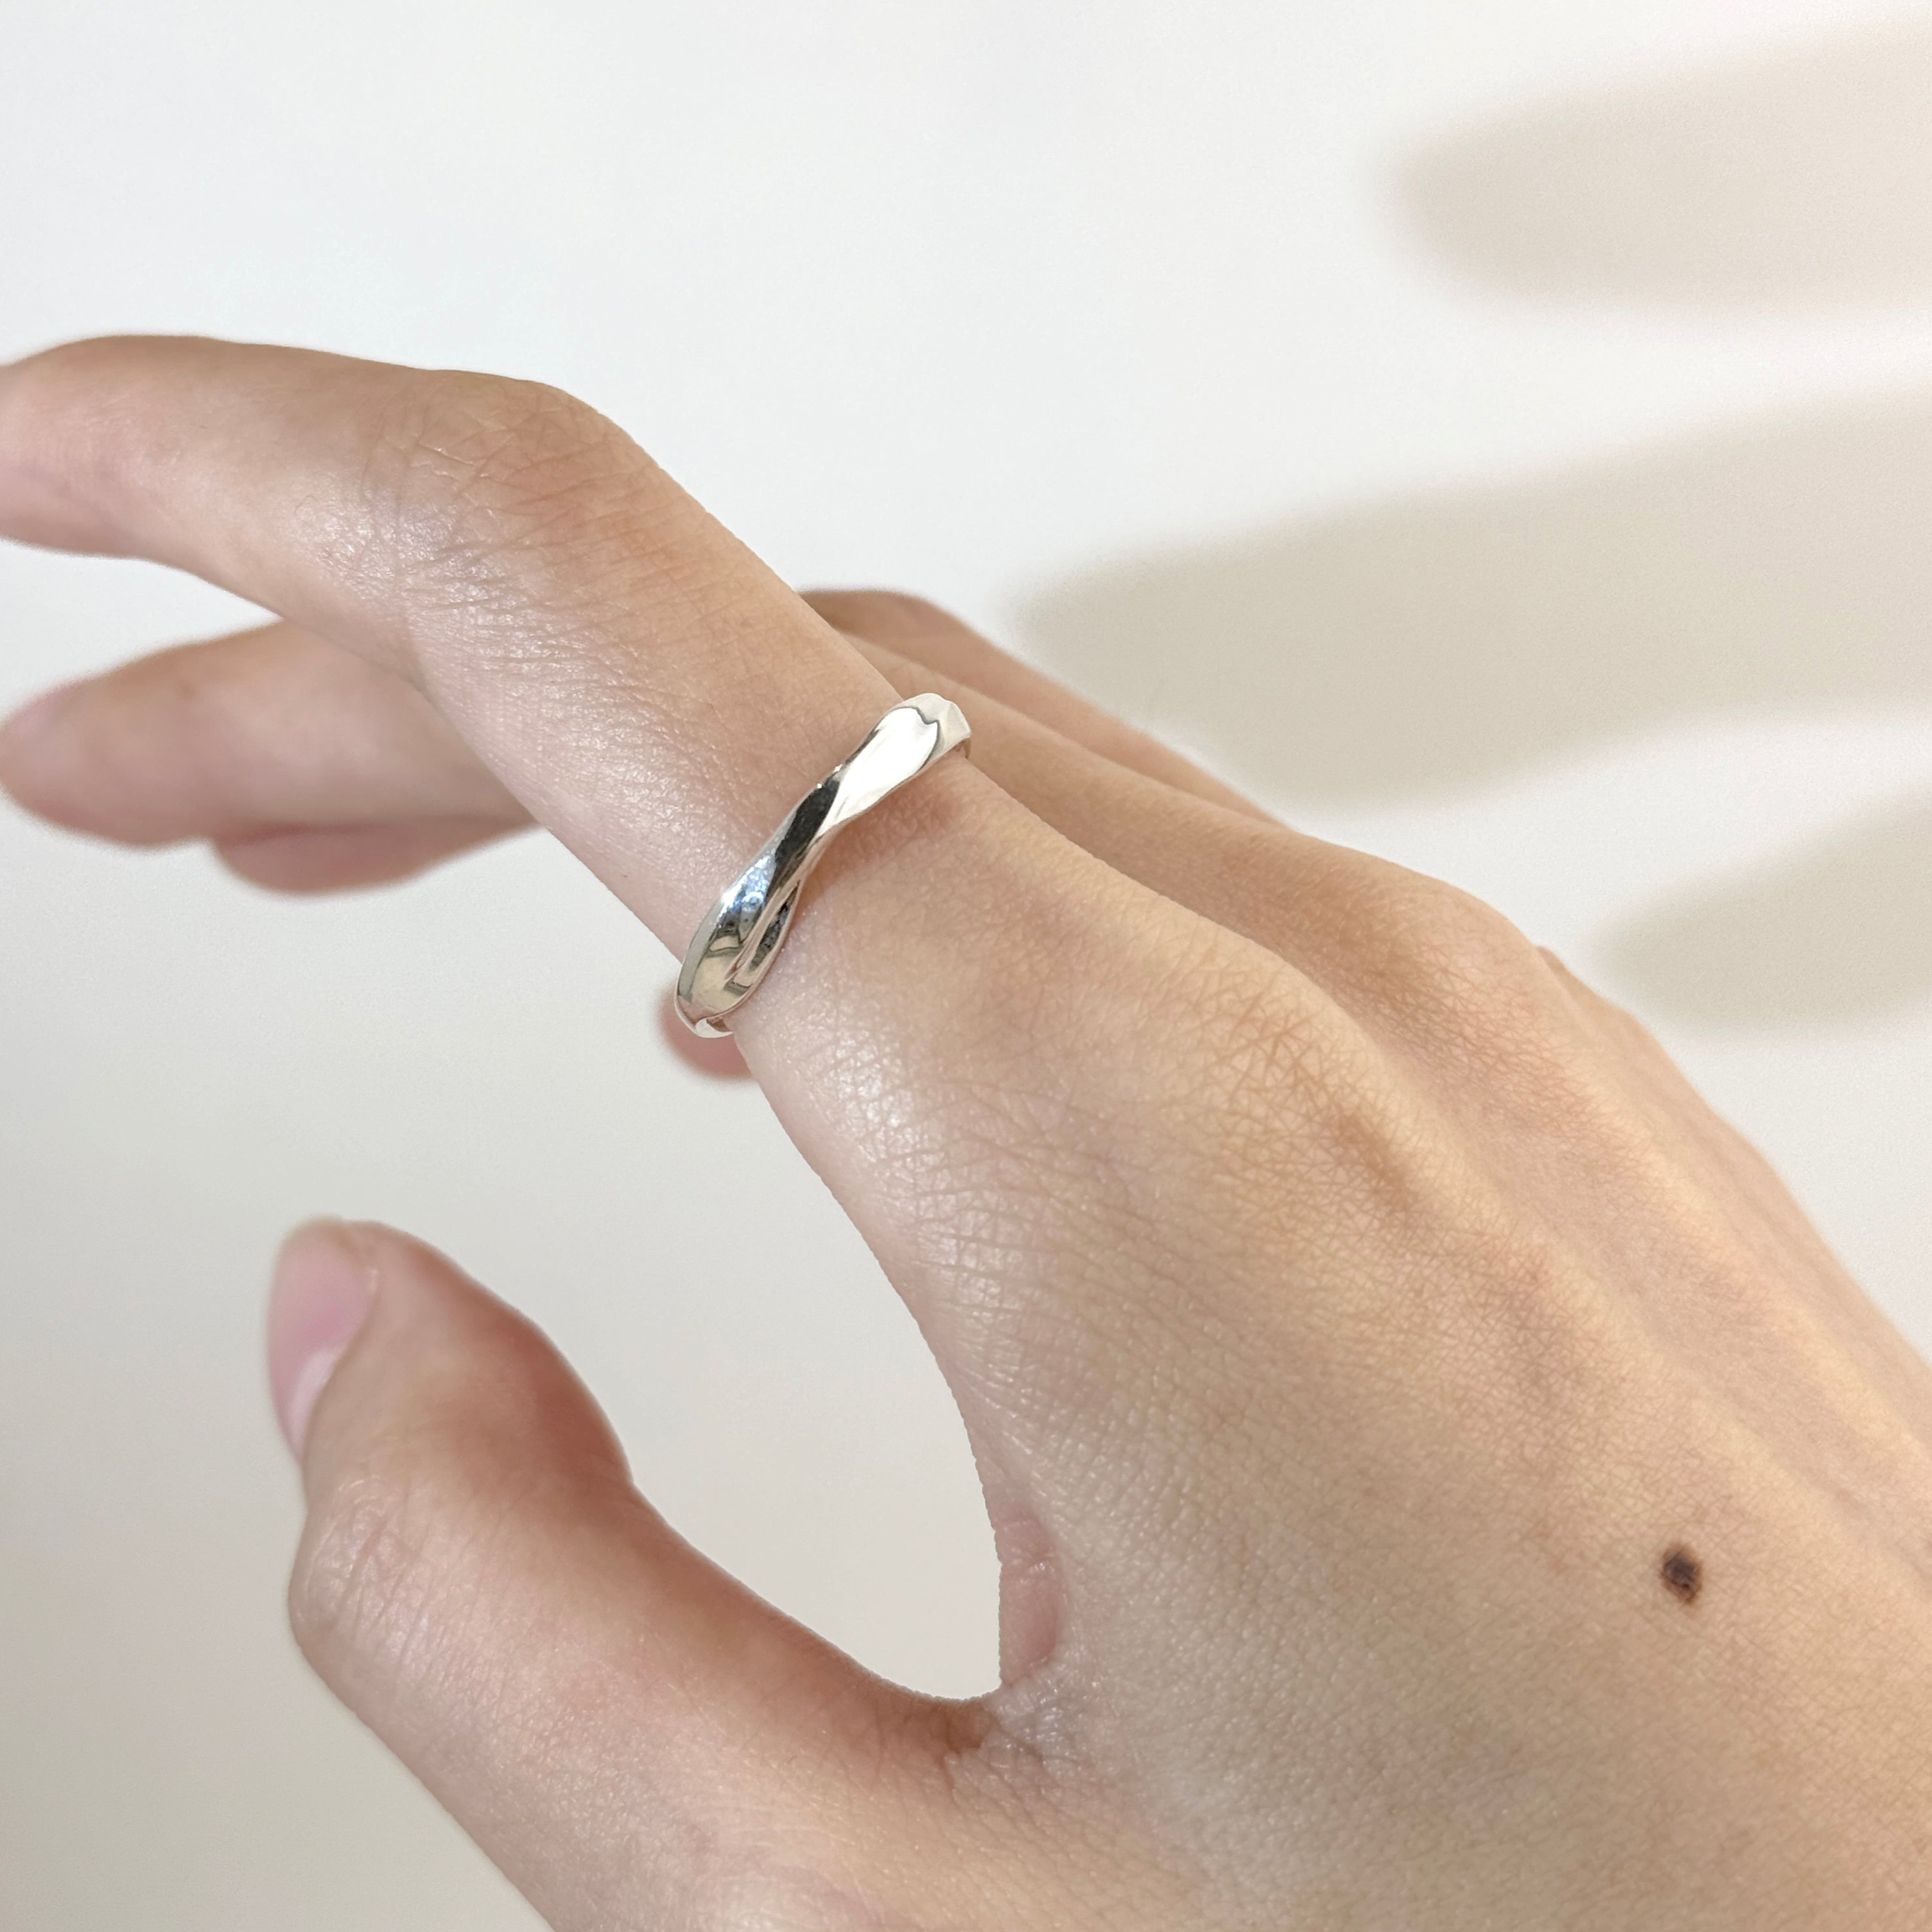 Alsolike Eternal Circle Thin Ring